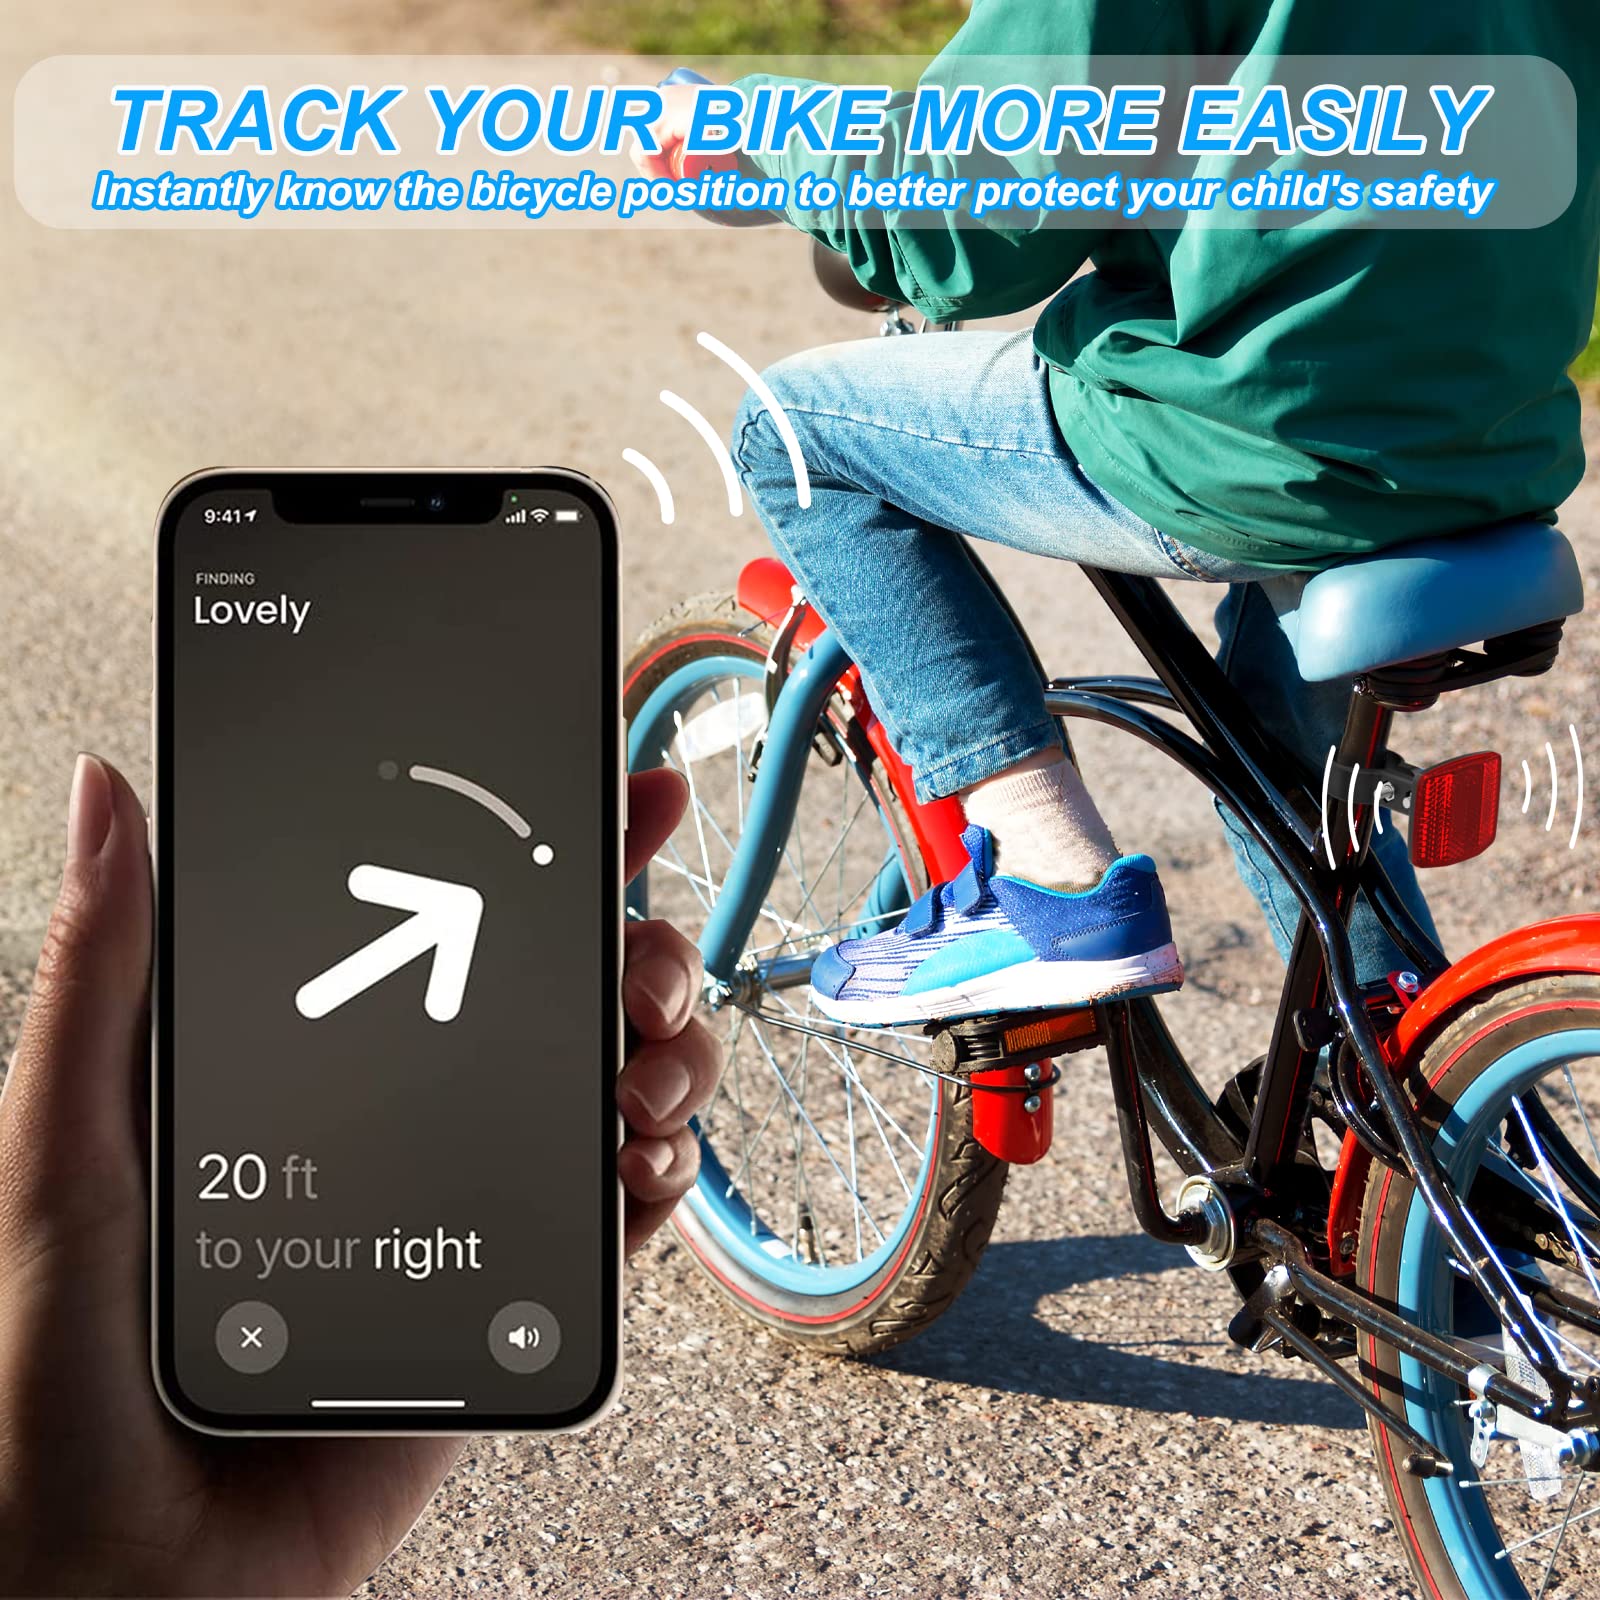 PerfiPro Airtag Bike Mount, Hidden Bike GPS Tracker Case for Apple Airtag, Airtag Bike Seatpost Reflector Mounts, Anti-Theft Airtag Holder for Bike, Electric Bicycle, Scooter